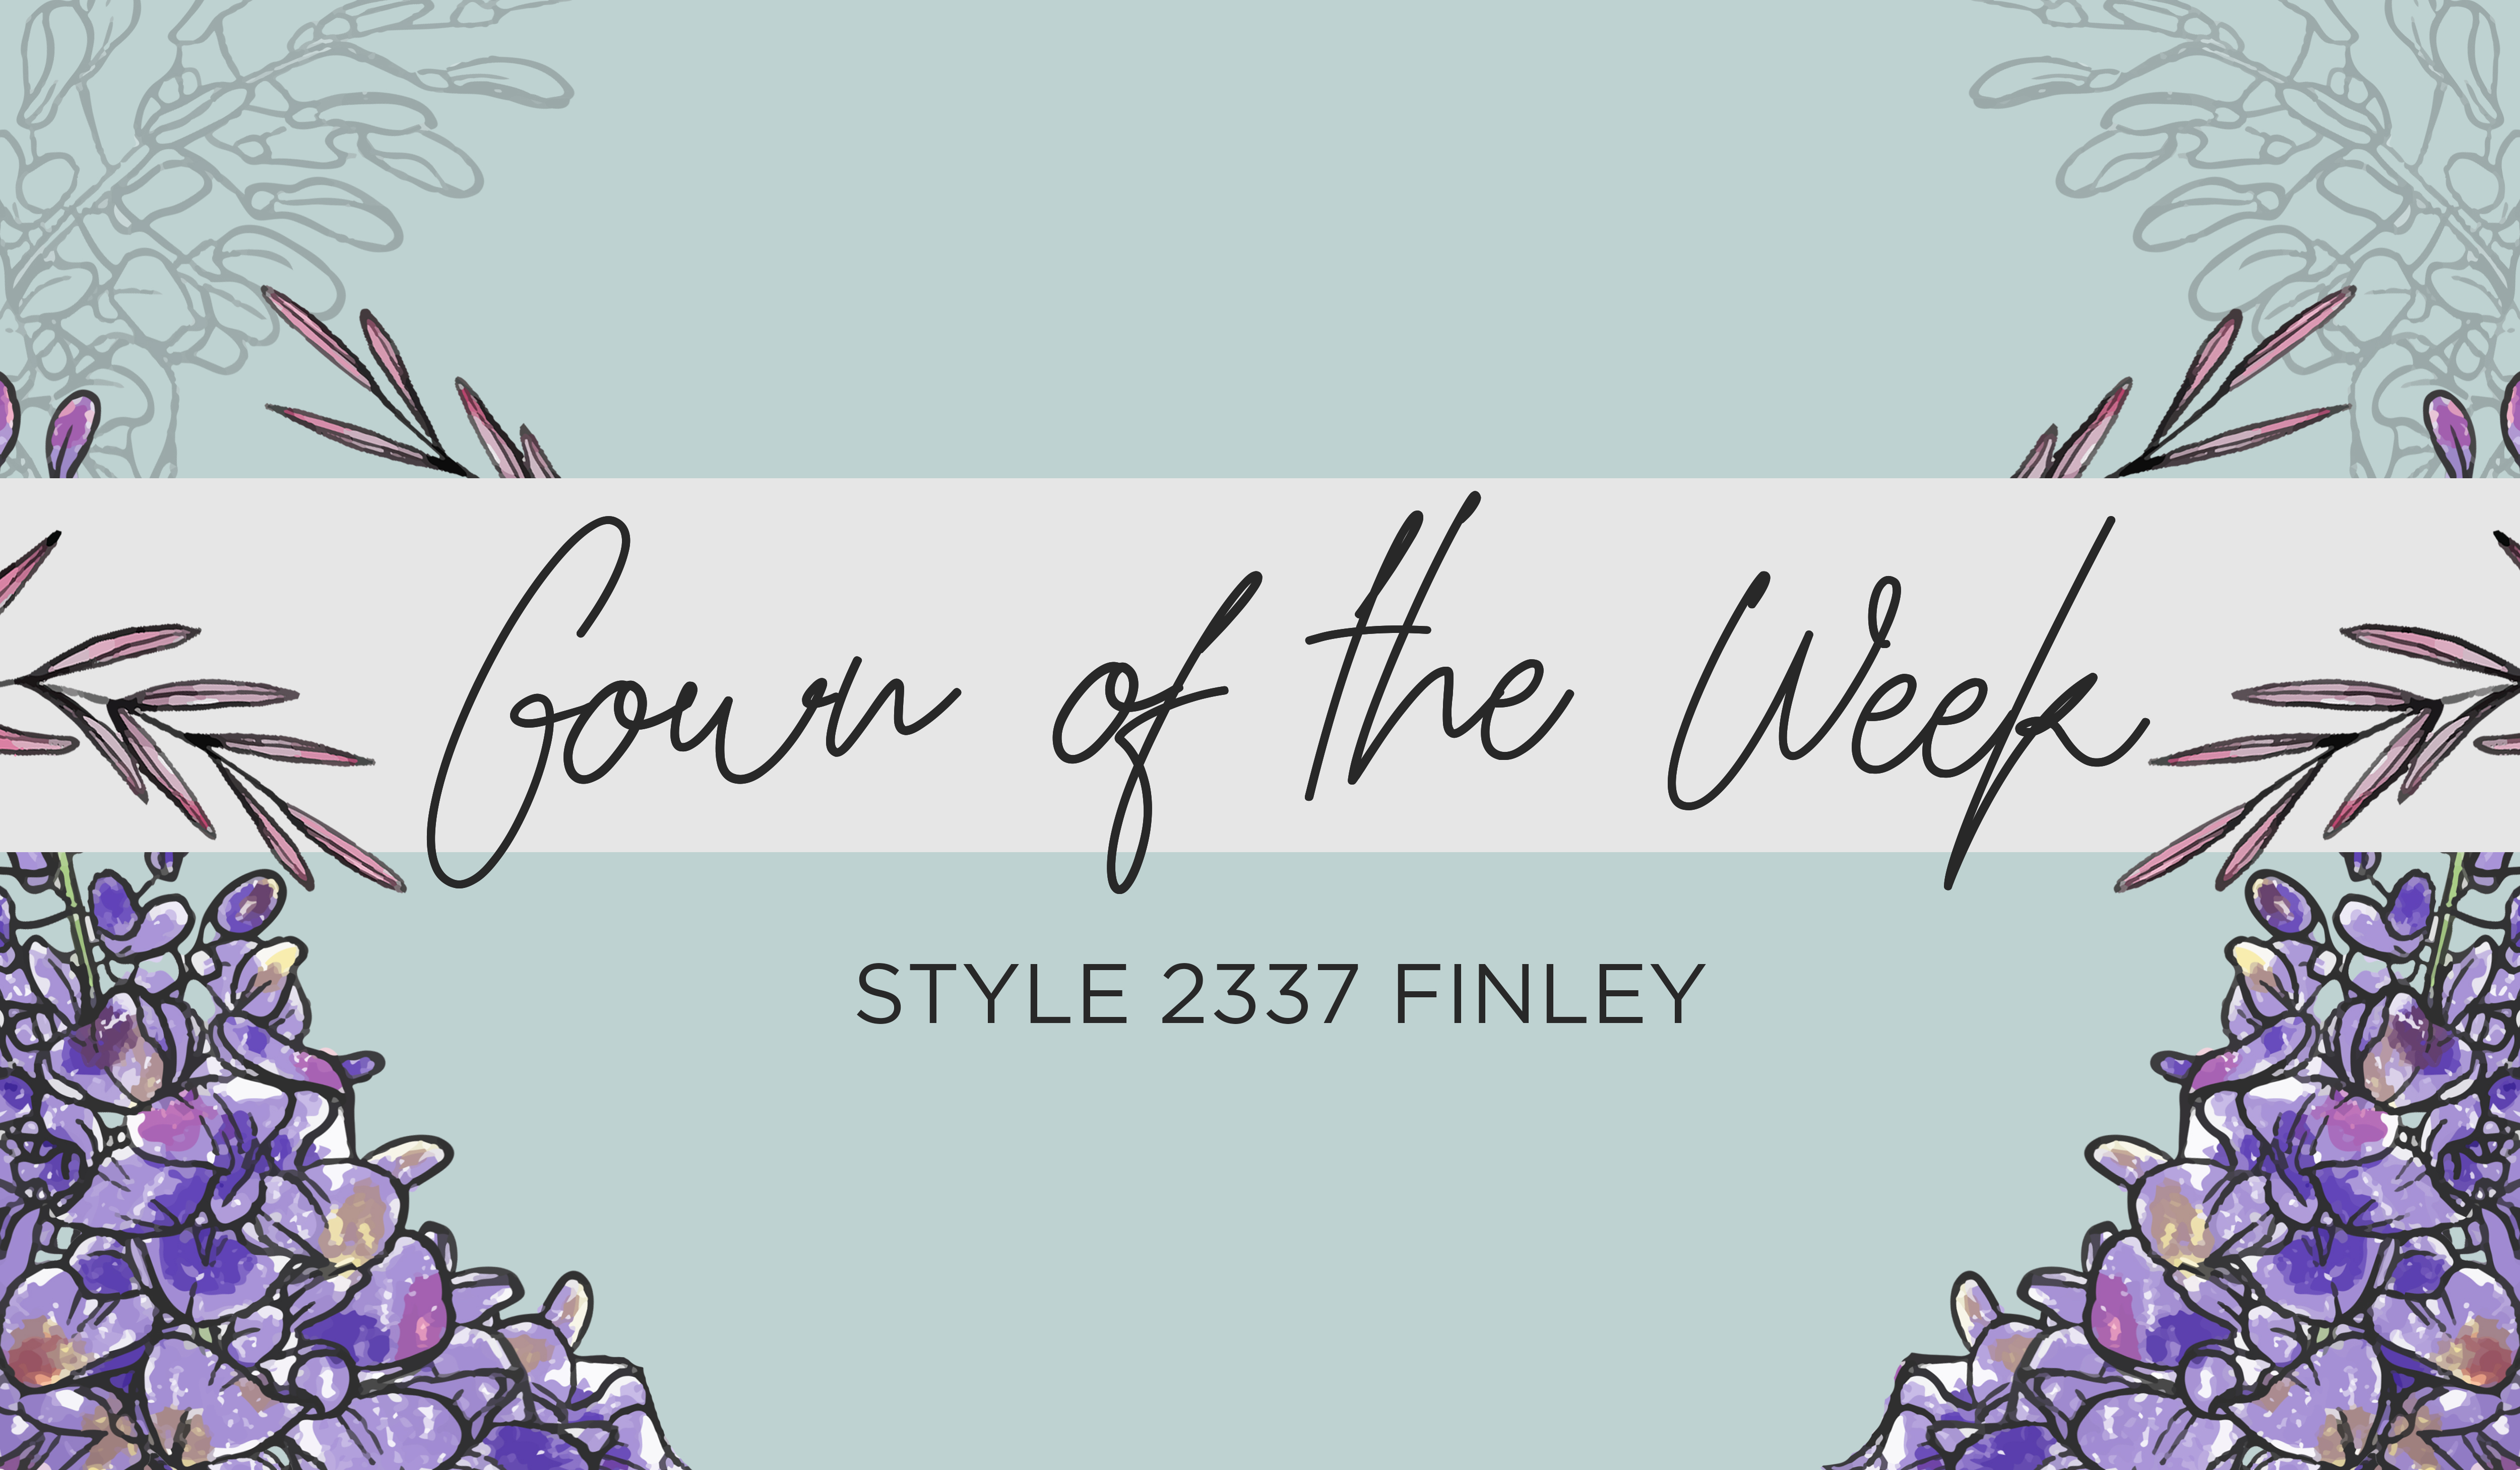 Style 2337 Finley | Casablanca Gridal Gown of the Week